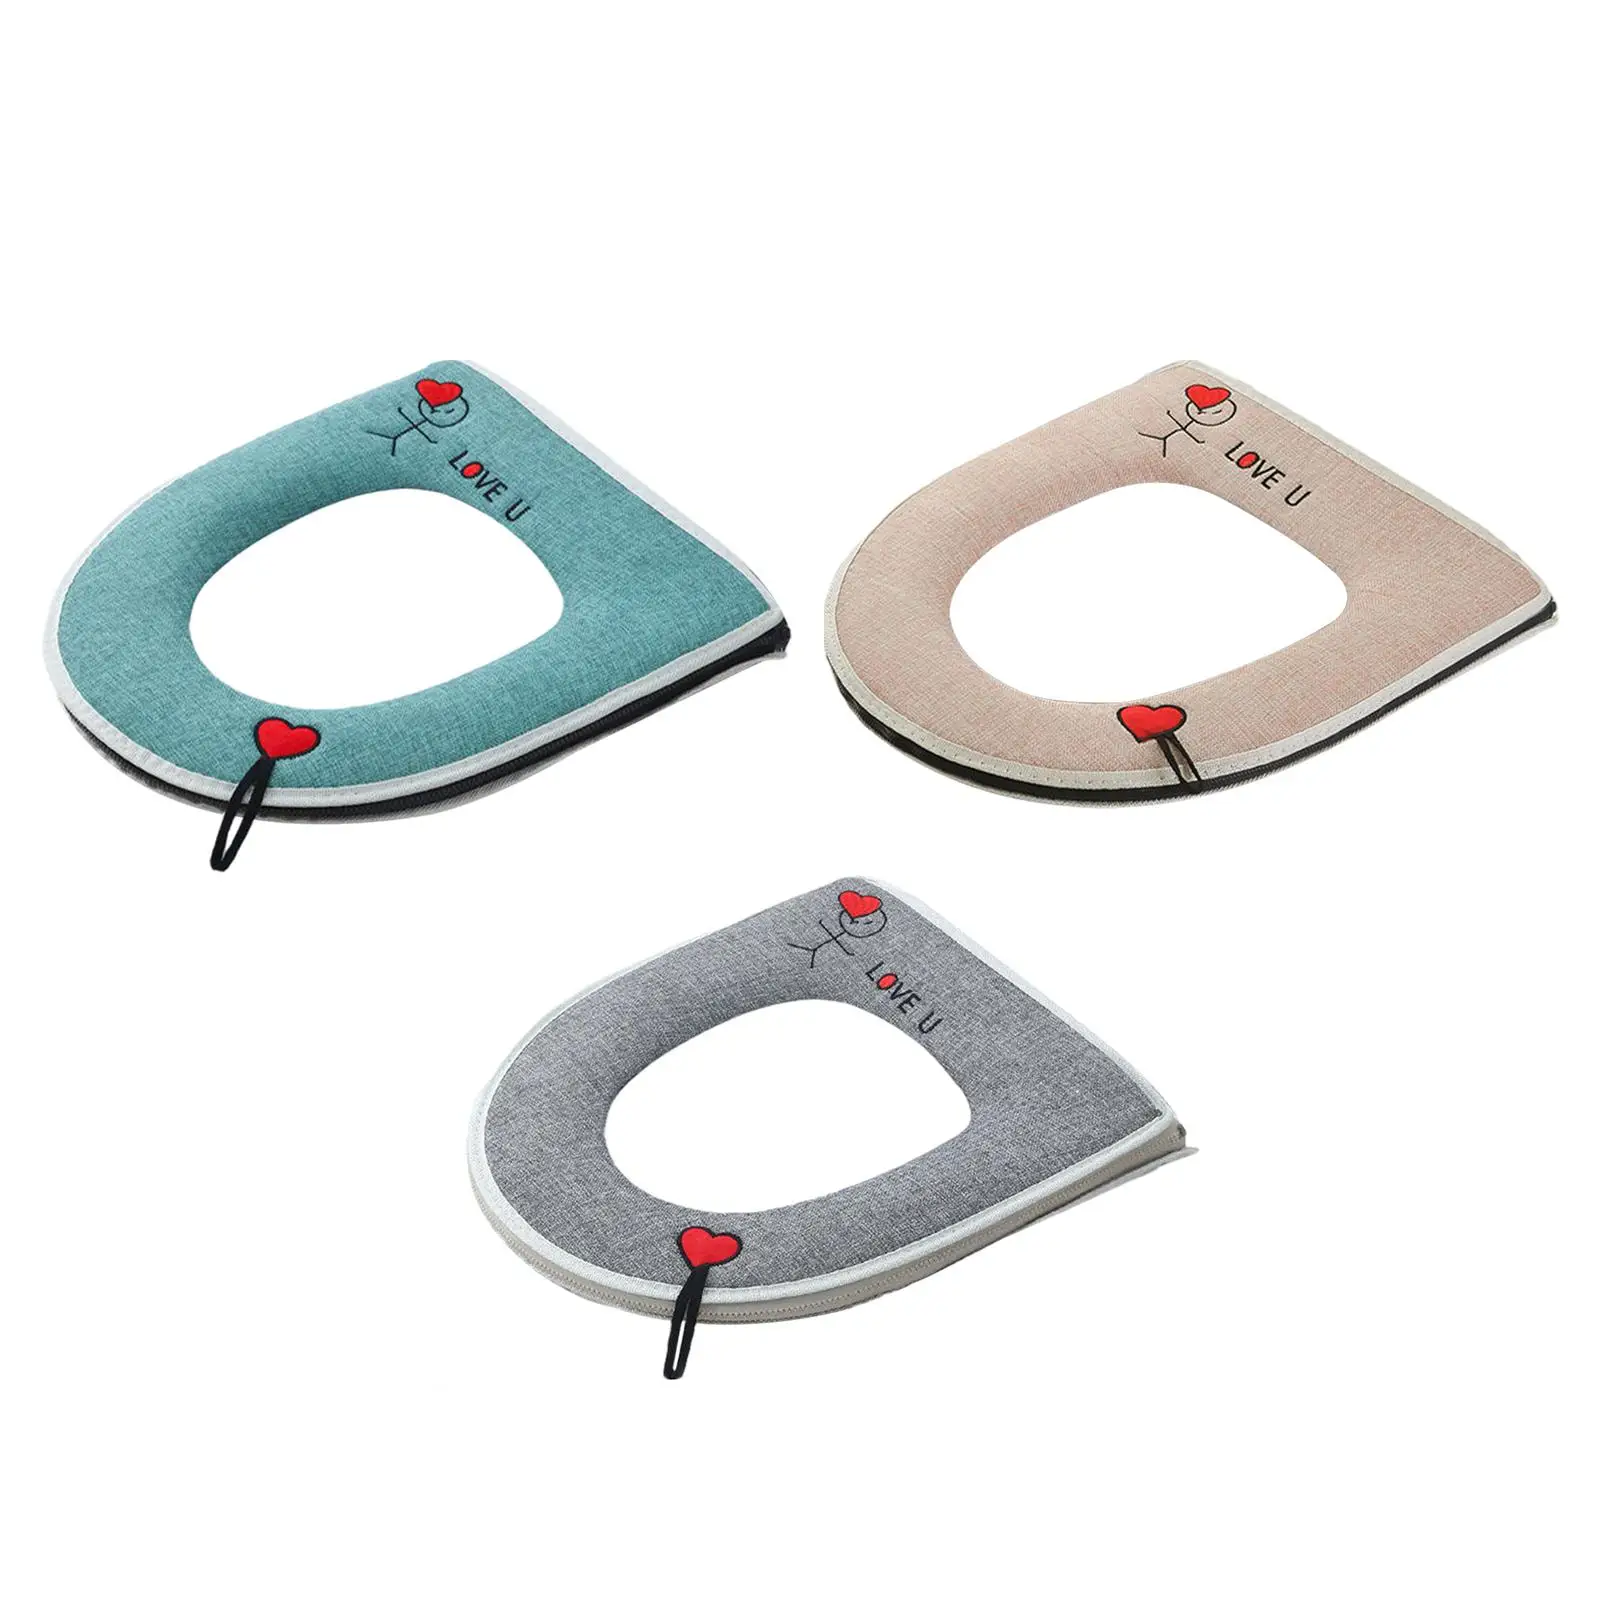 Thicken Toilet Seat Cushion with Handle and Zipper Portable Warm Toilet Seat Covers for Traveling Bathroom Household Home Hotel